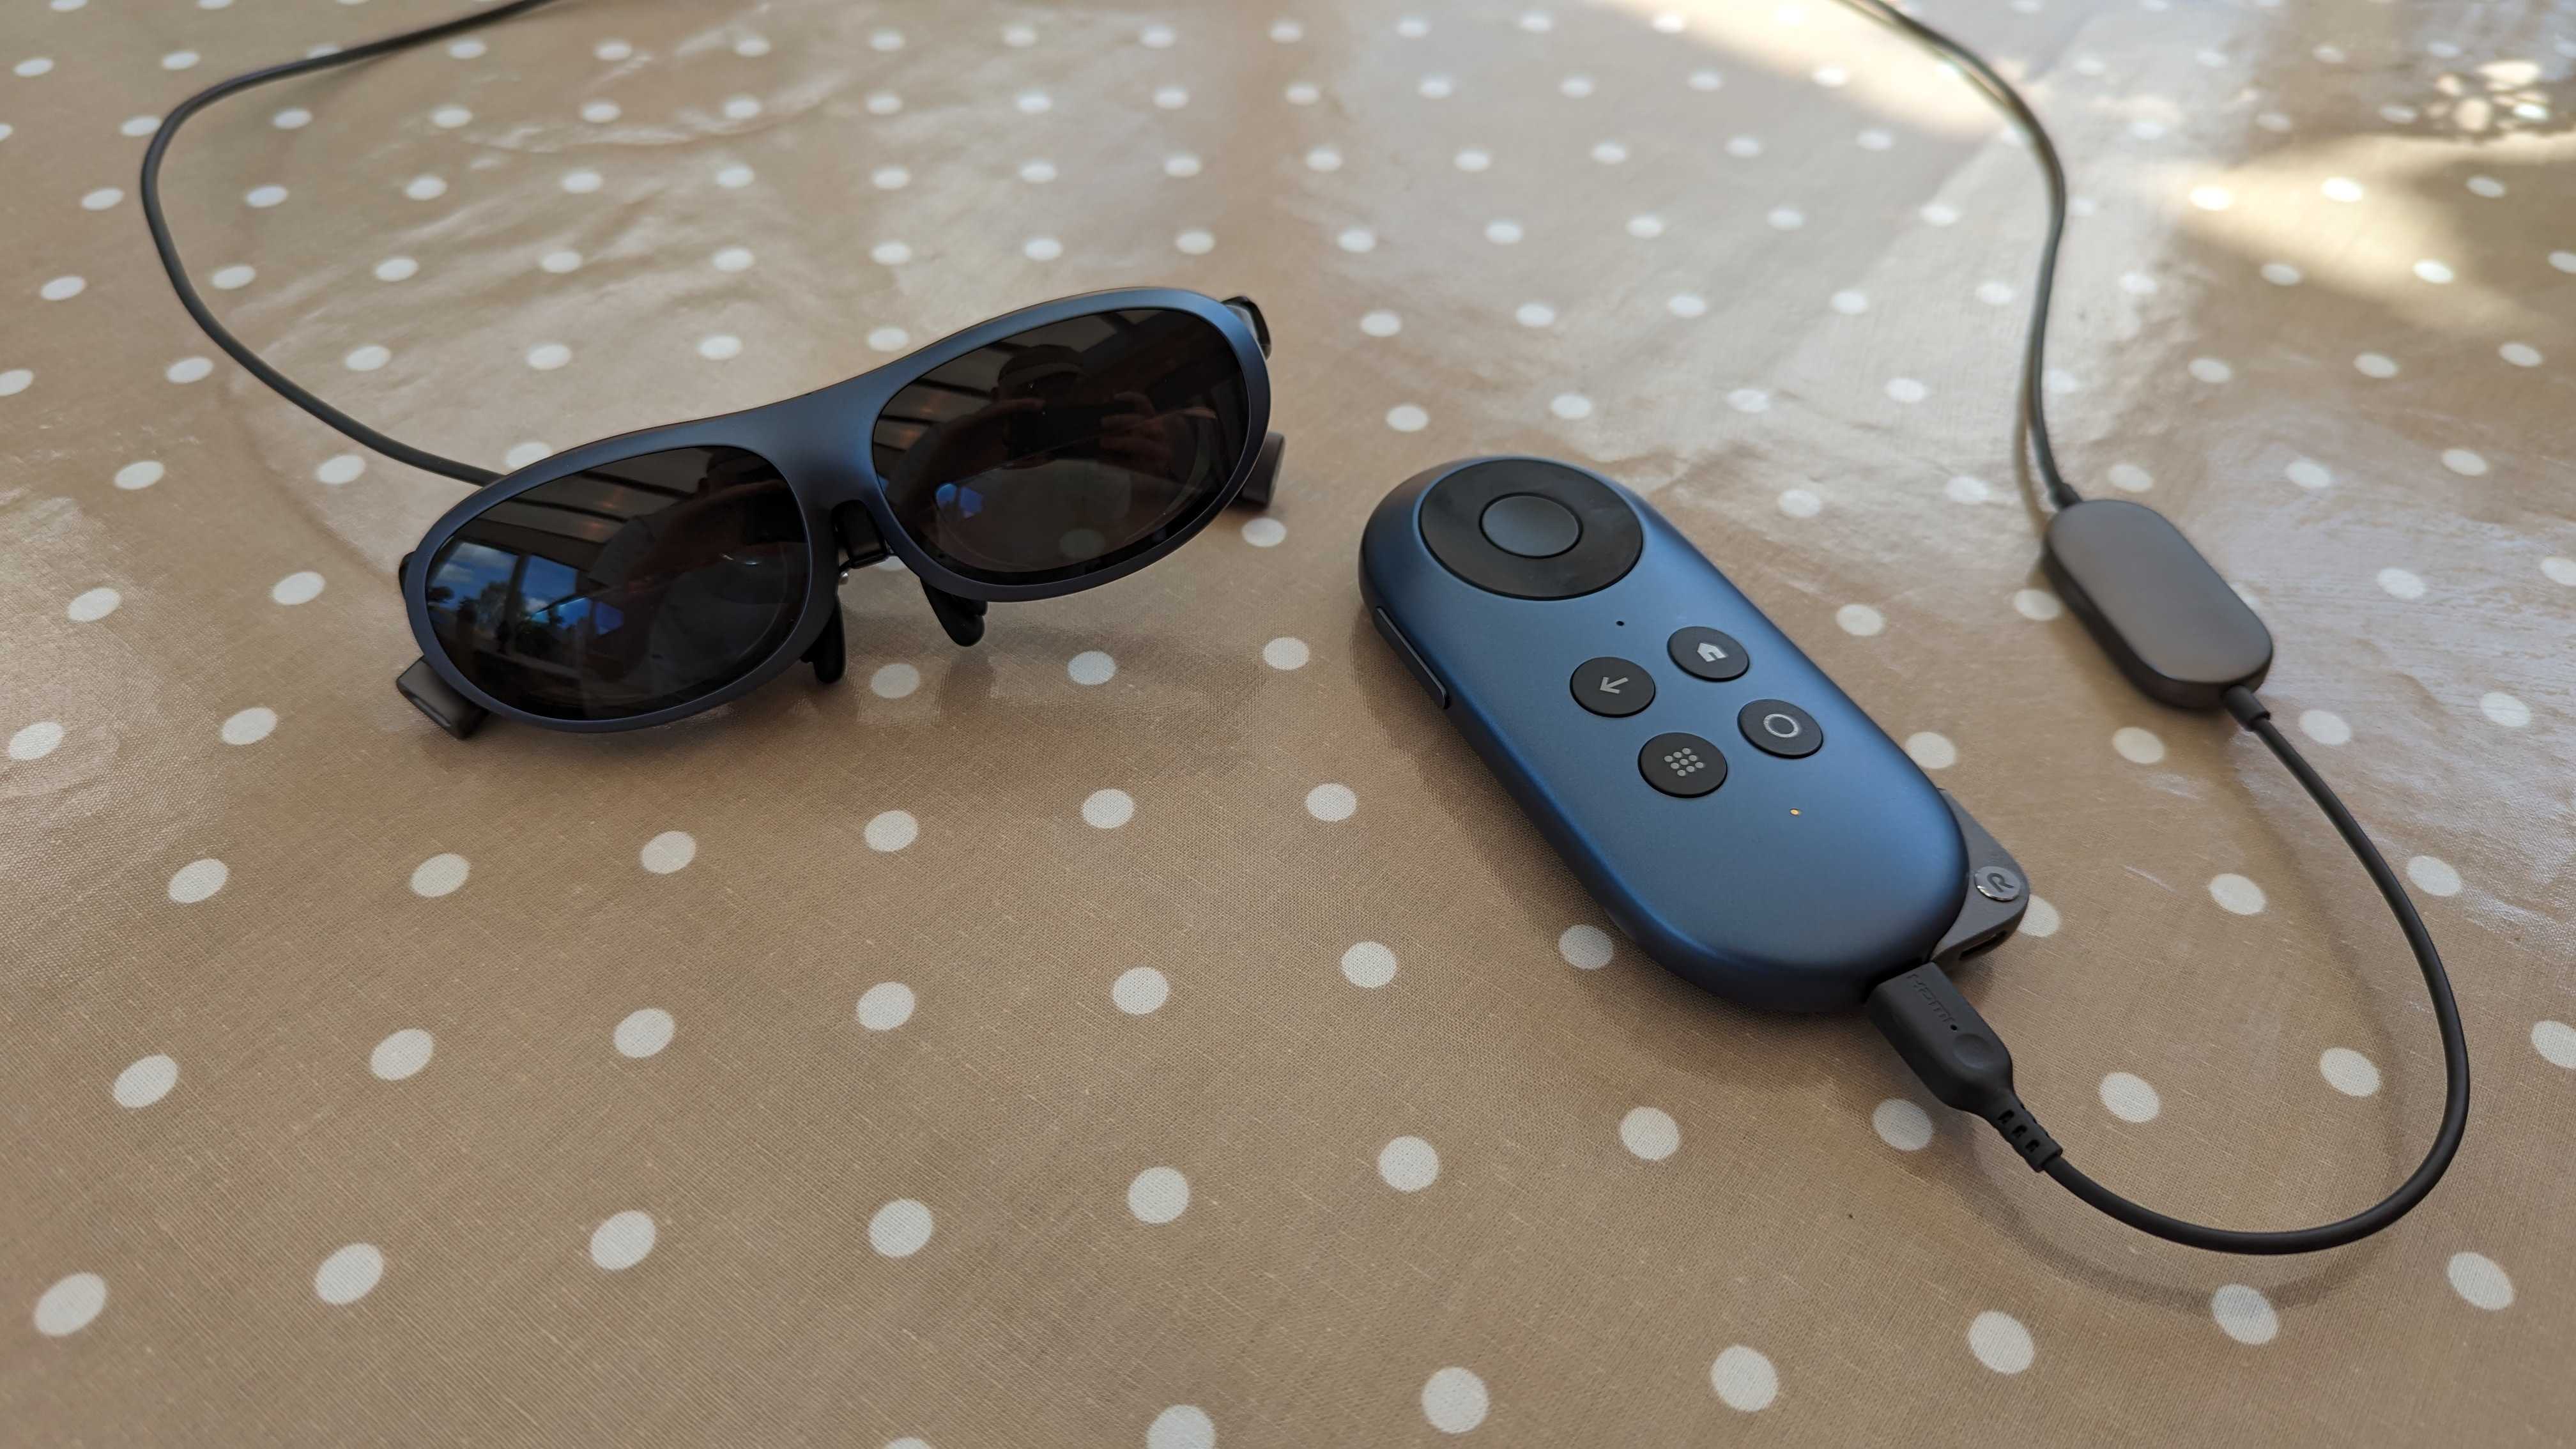 Rokid Max AR glasses review: another passable pair of smart specs